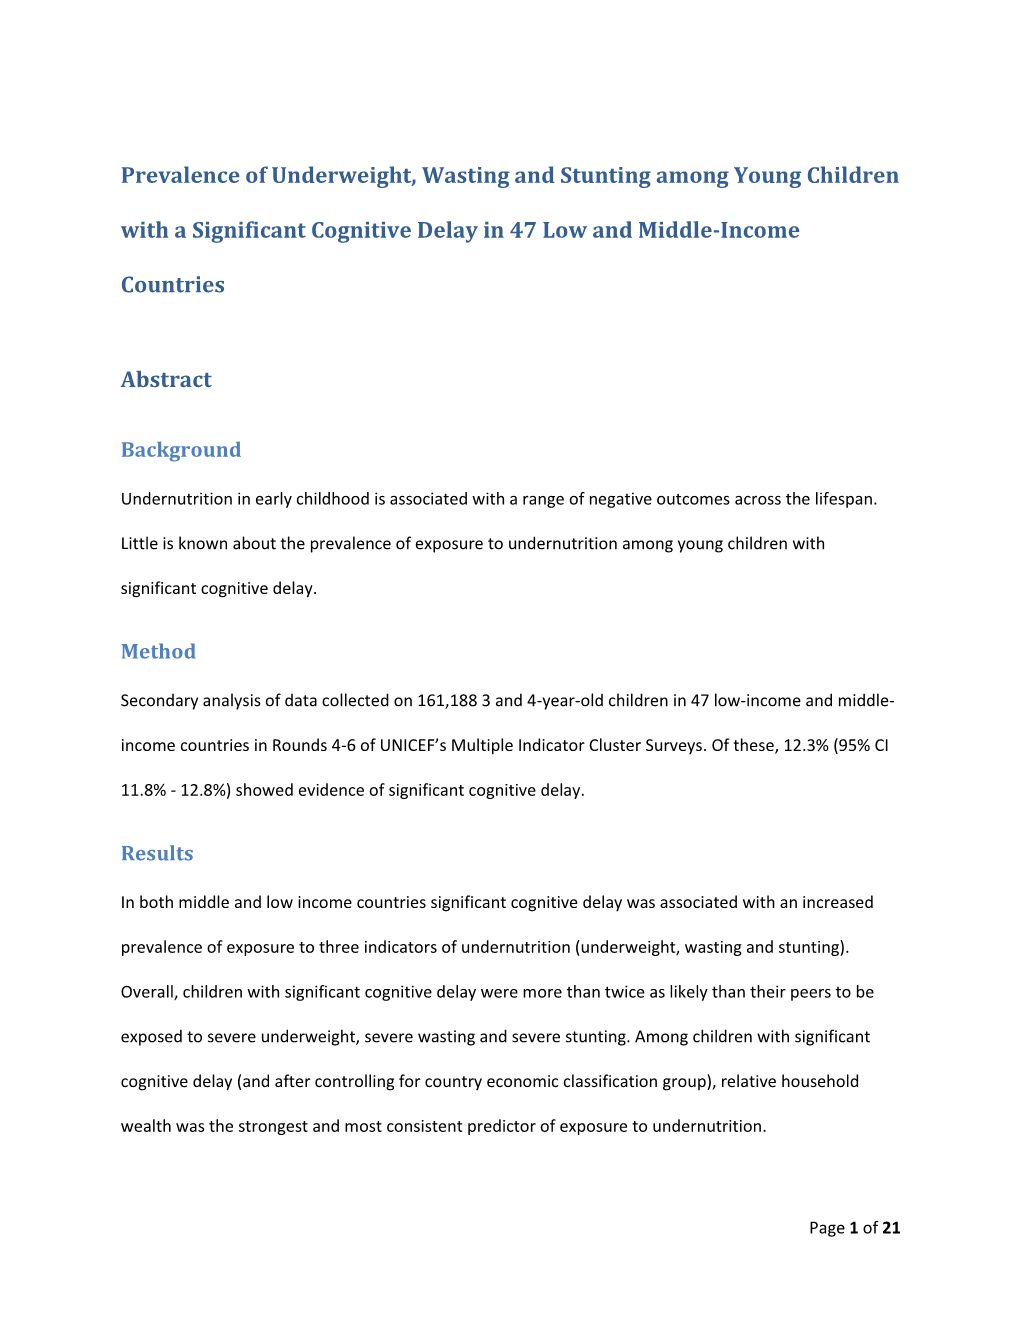 Prevalence of Underweight, Wasting and Stunting Among Young Children with a Significant Cognitive Delay in 47 Low and Middle-Income